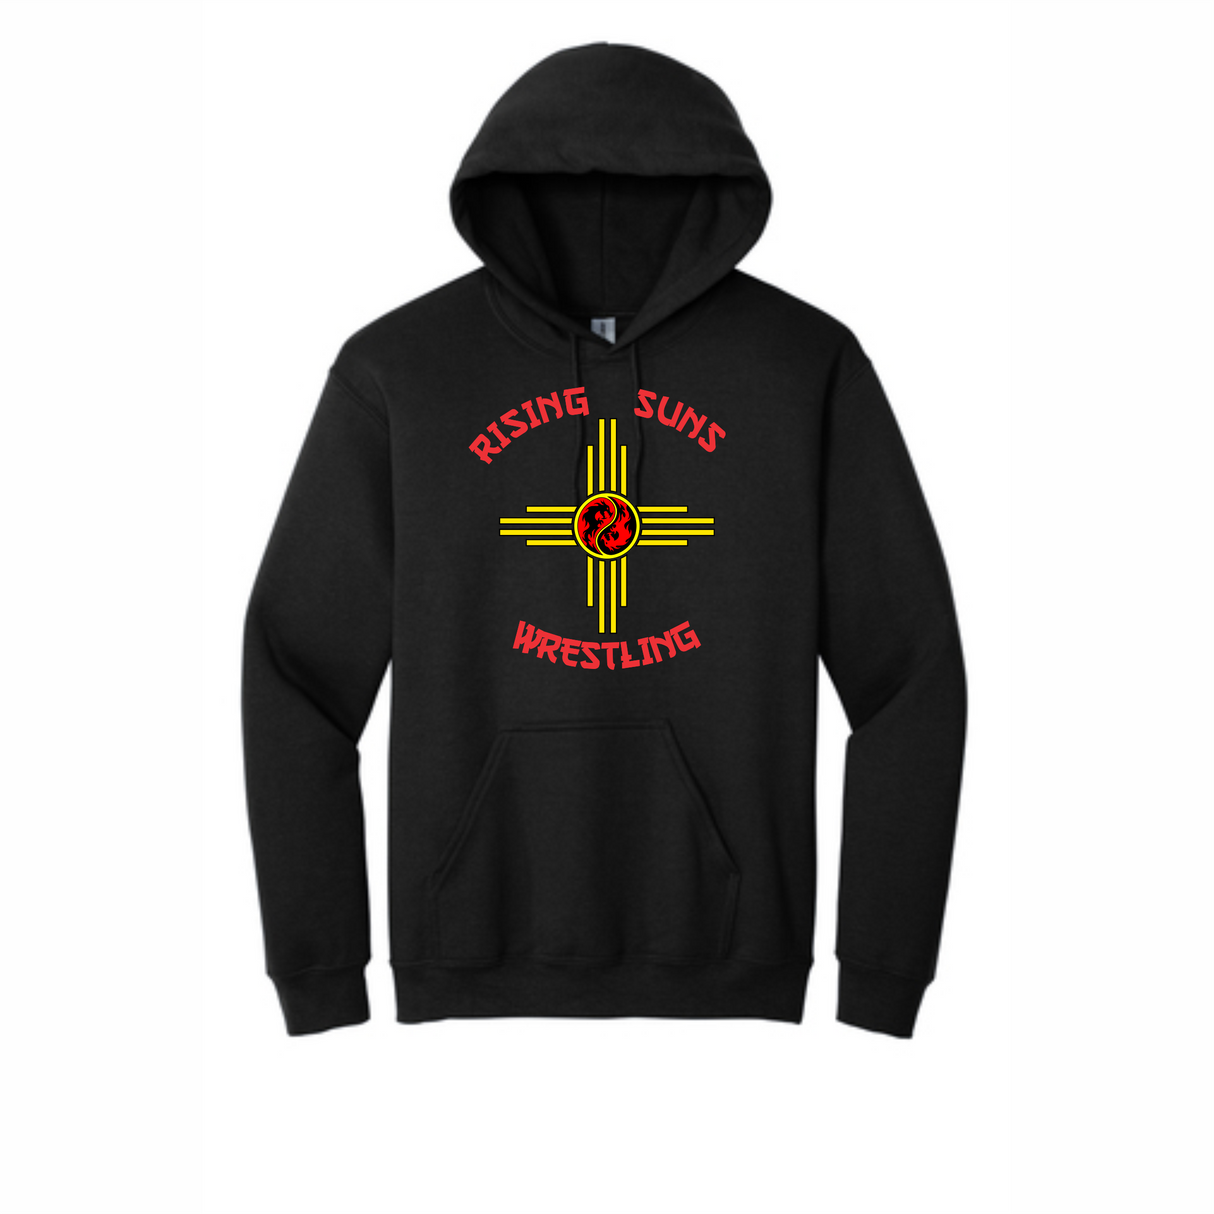 Rising Suns Wrestling Pullover Hoodie